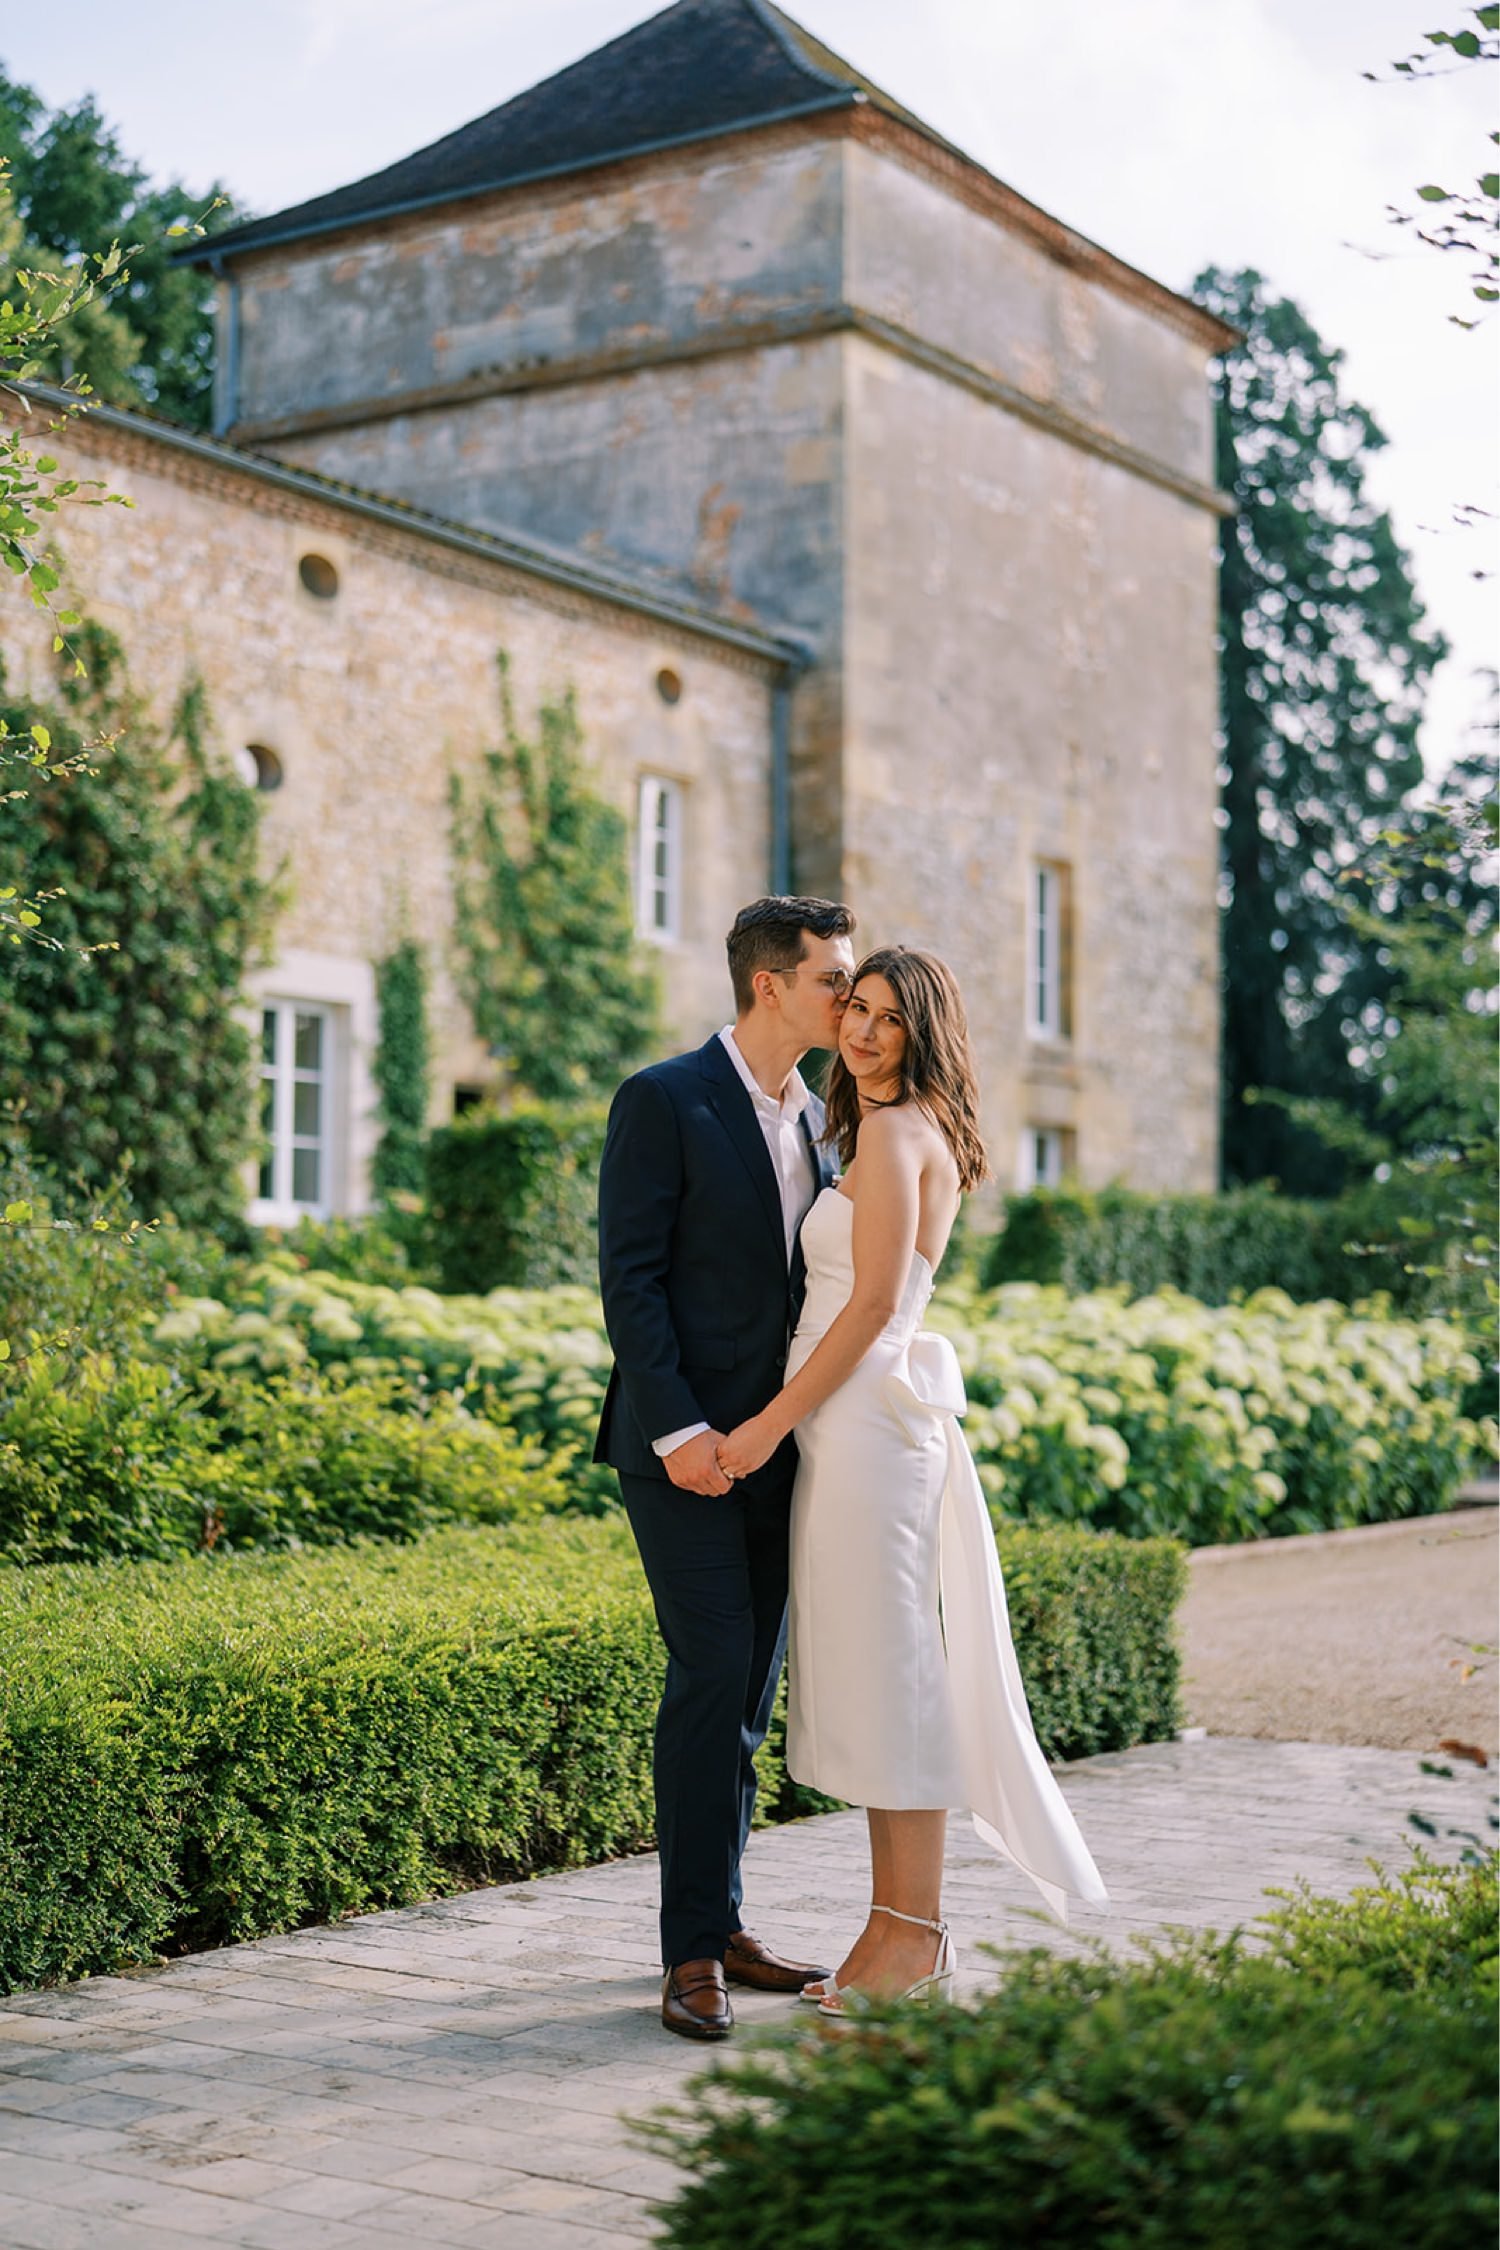 047_Intimate French chateau wedding at Chateau de Redon by top luxury destination photographer Ryan Flynn.jpg